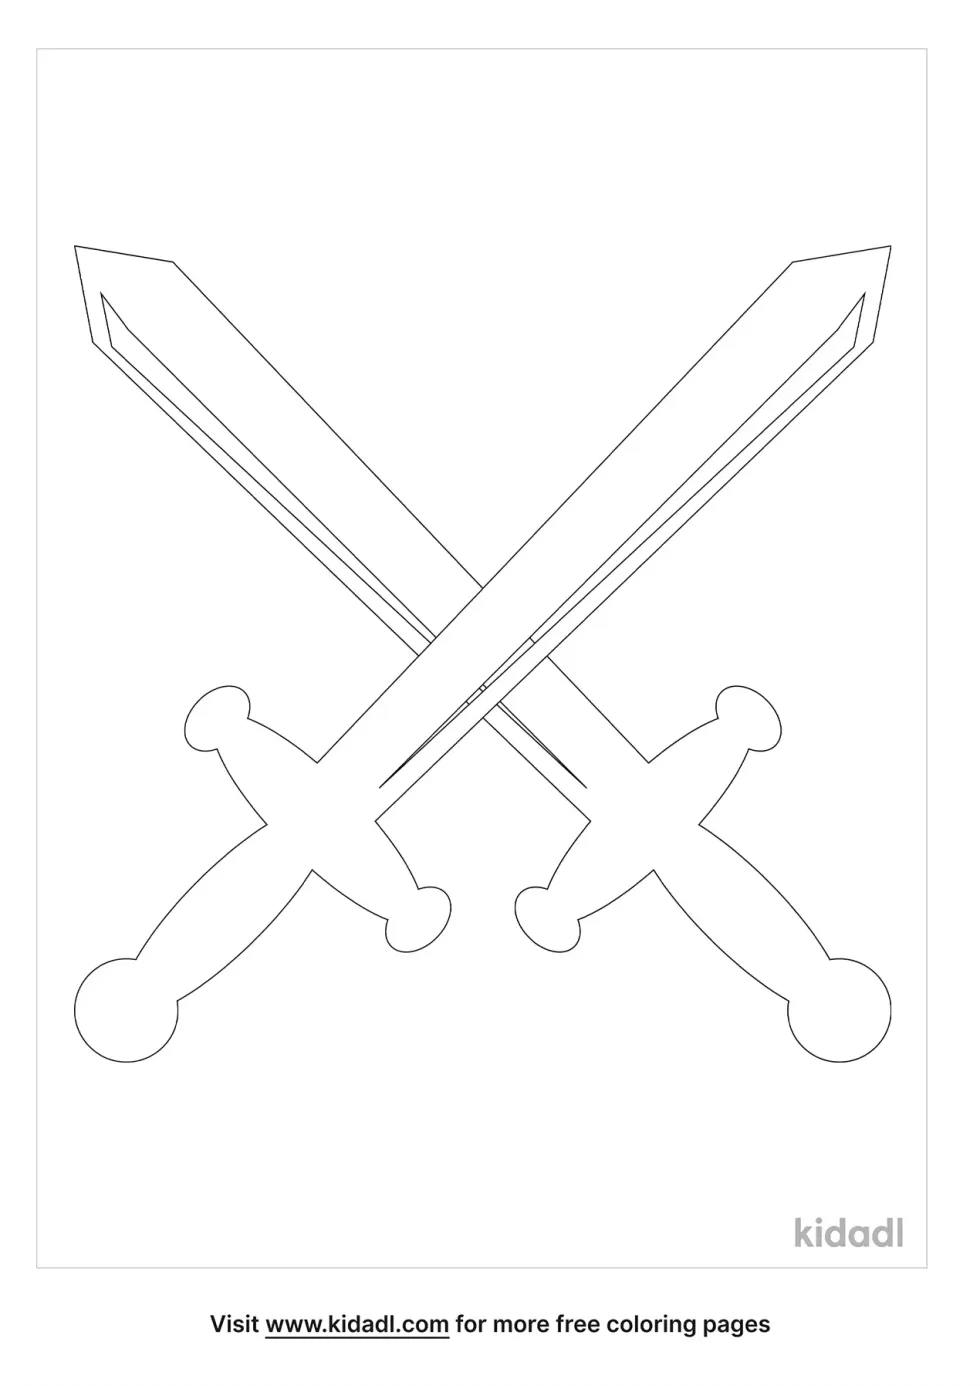 Pirate Swords Crossed Coloring Page